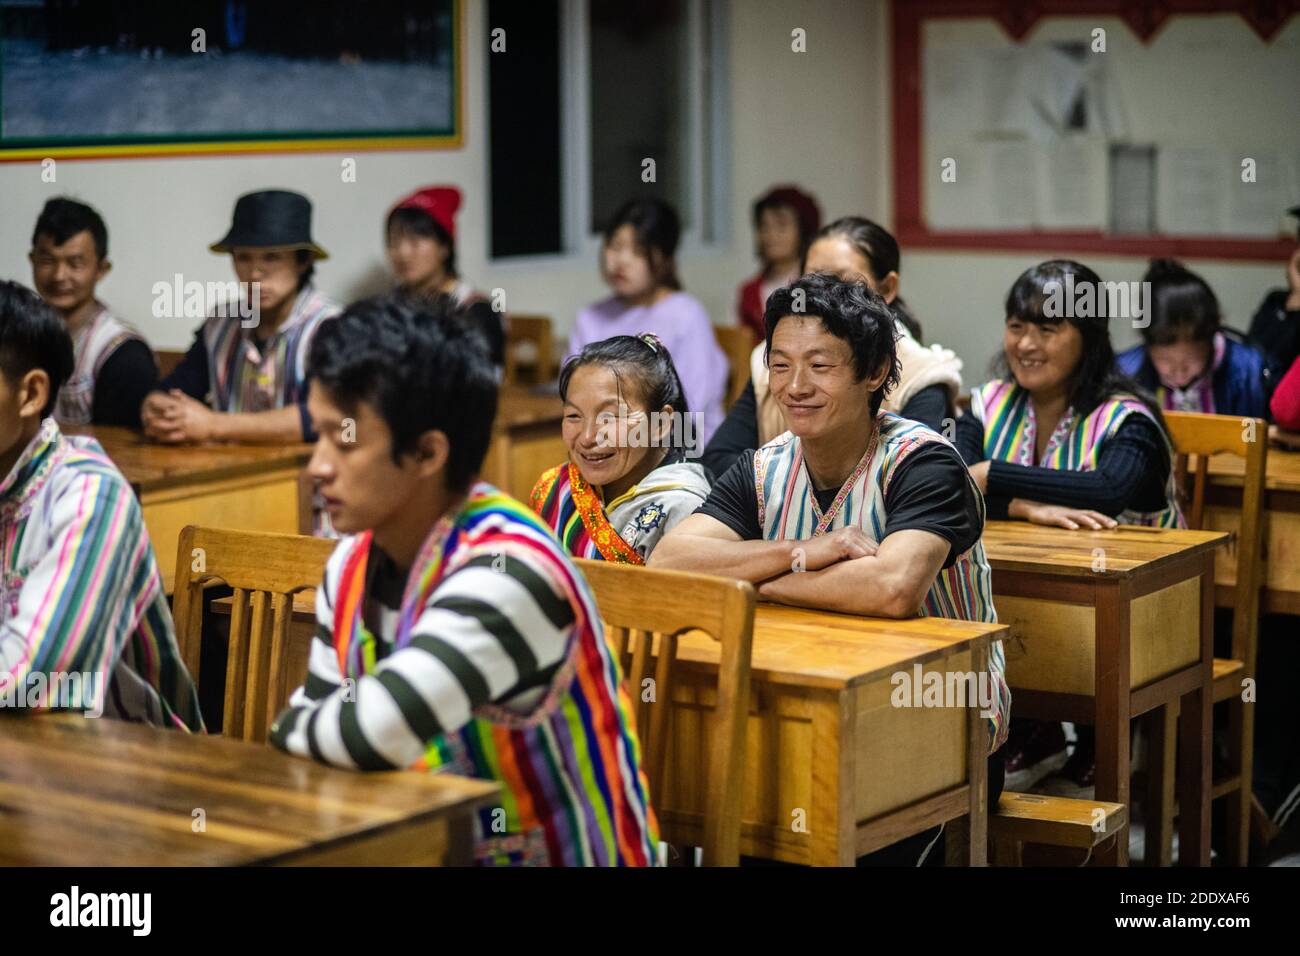 (201127) -- KUNMING, Nov. 27, 2020 (Xinhua) -- Dulong villagers attend an evening lesson in Kongdang Village of Dulongjiang Township, Gongshan Dulong and Nu Autonomous County, southwest China's Yunnan Province, Oct. 28, 2020. Dulong is a mountain-dwelling ethnic group in southwest China. It is one of the least populous of China's 56 minority nationalities. It is also called a 'direct-transition' minority ethnic group because the Dulong people didn't bid farewell to primitive life until the founding of the People's Republic of China in 1949 and since then they directly stepped into the sociali Stock Photo